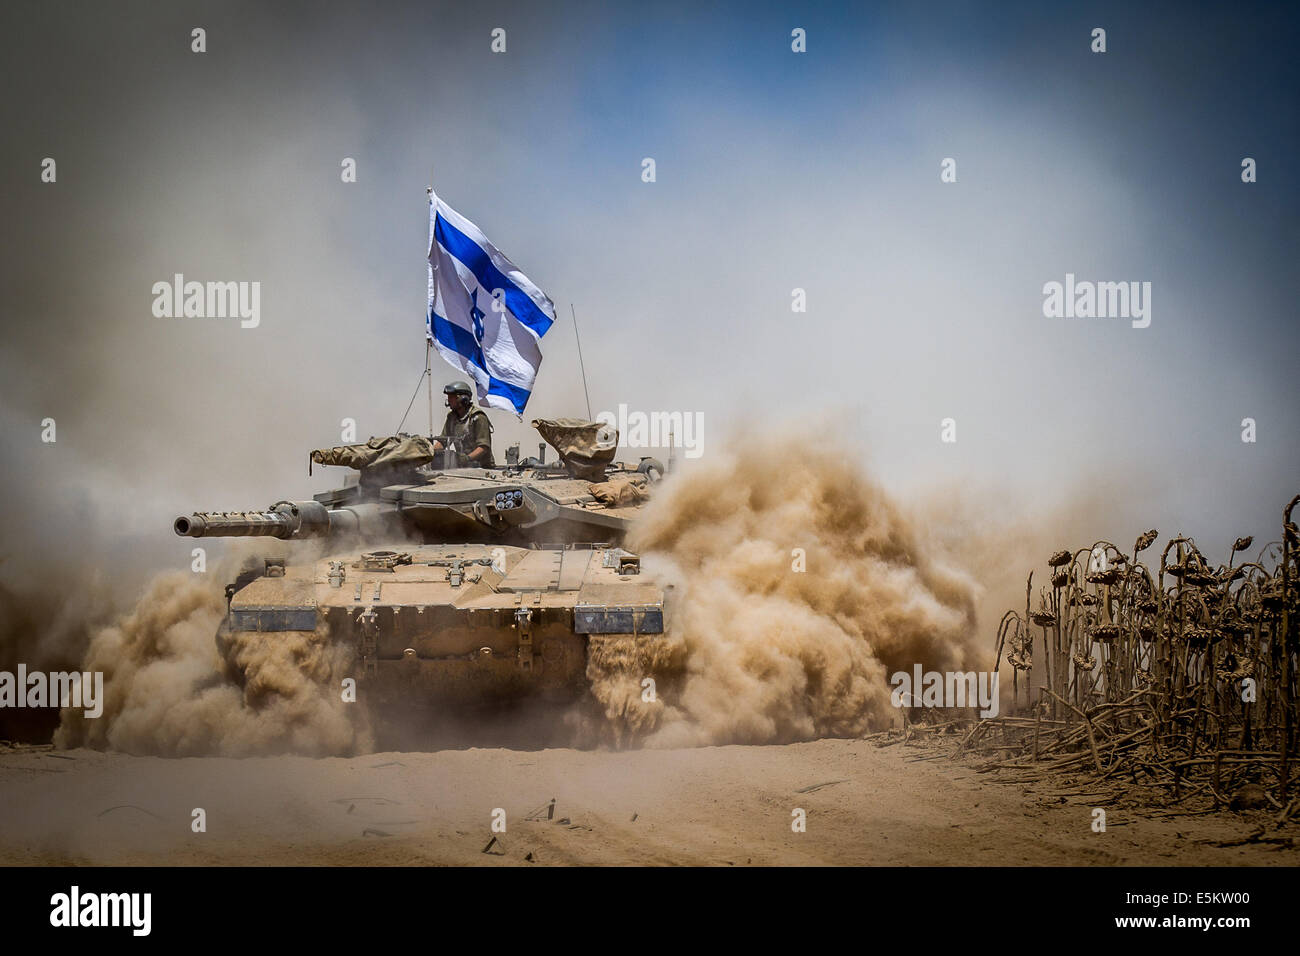 Gaza Border. 3rd Aug, 2014. An Israeli Merkava tank pulls back from the Gaza Strip to an army deployment area in southern Israel bordering the Gaza Strip, on Aug. 3, 2014. The Israeli military has announced that it will hold fire for seven hours Monday in parts of the Gaza Strip to facilitate the entry of humanitarian aid and for displaced Palestinians to return to their homes. Credit:  JINI/Xinhua/Alamy Live News Stock Photo